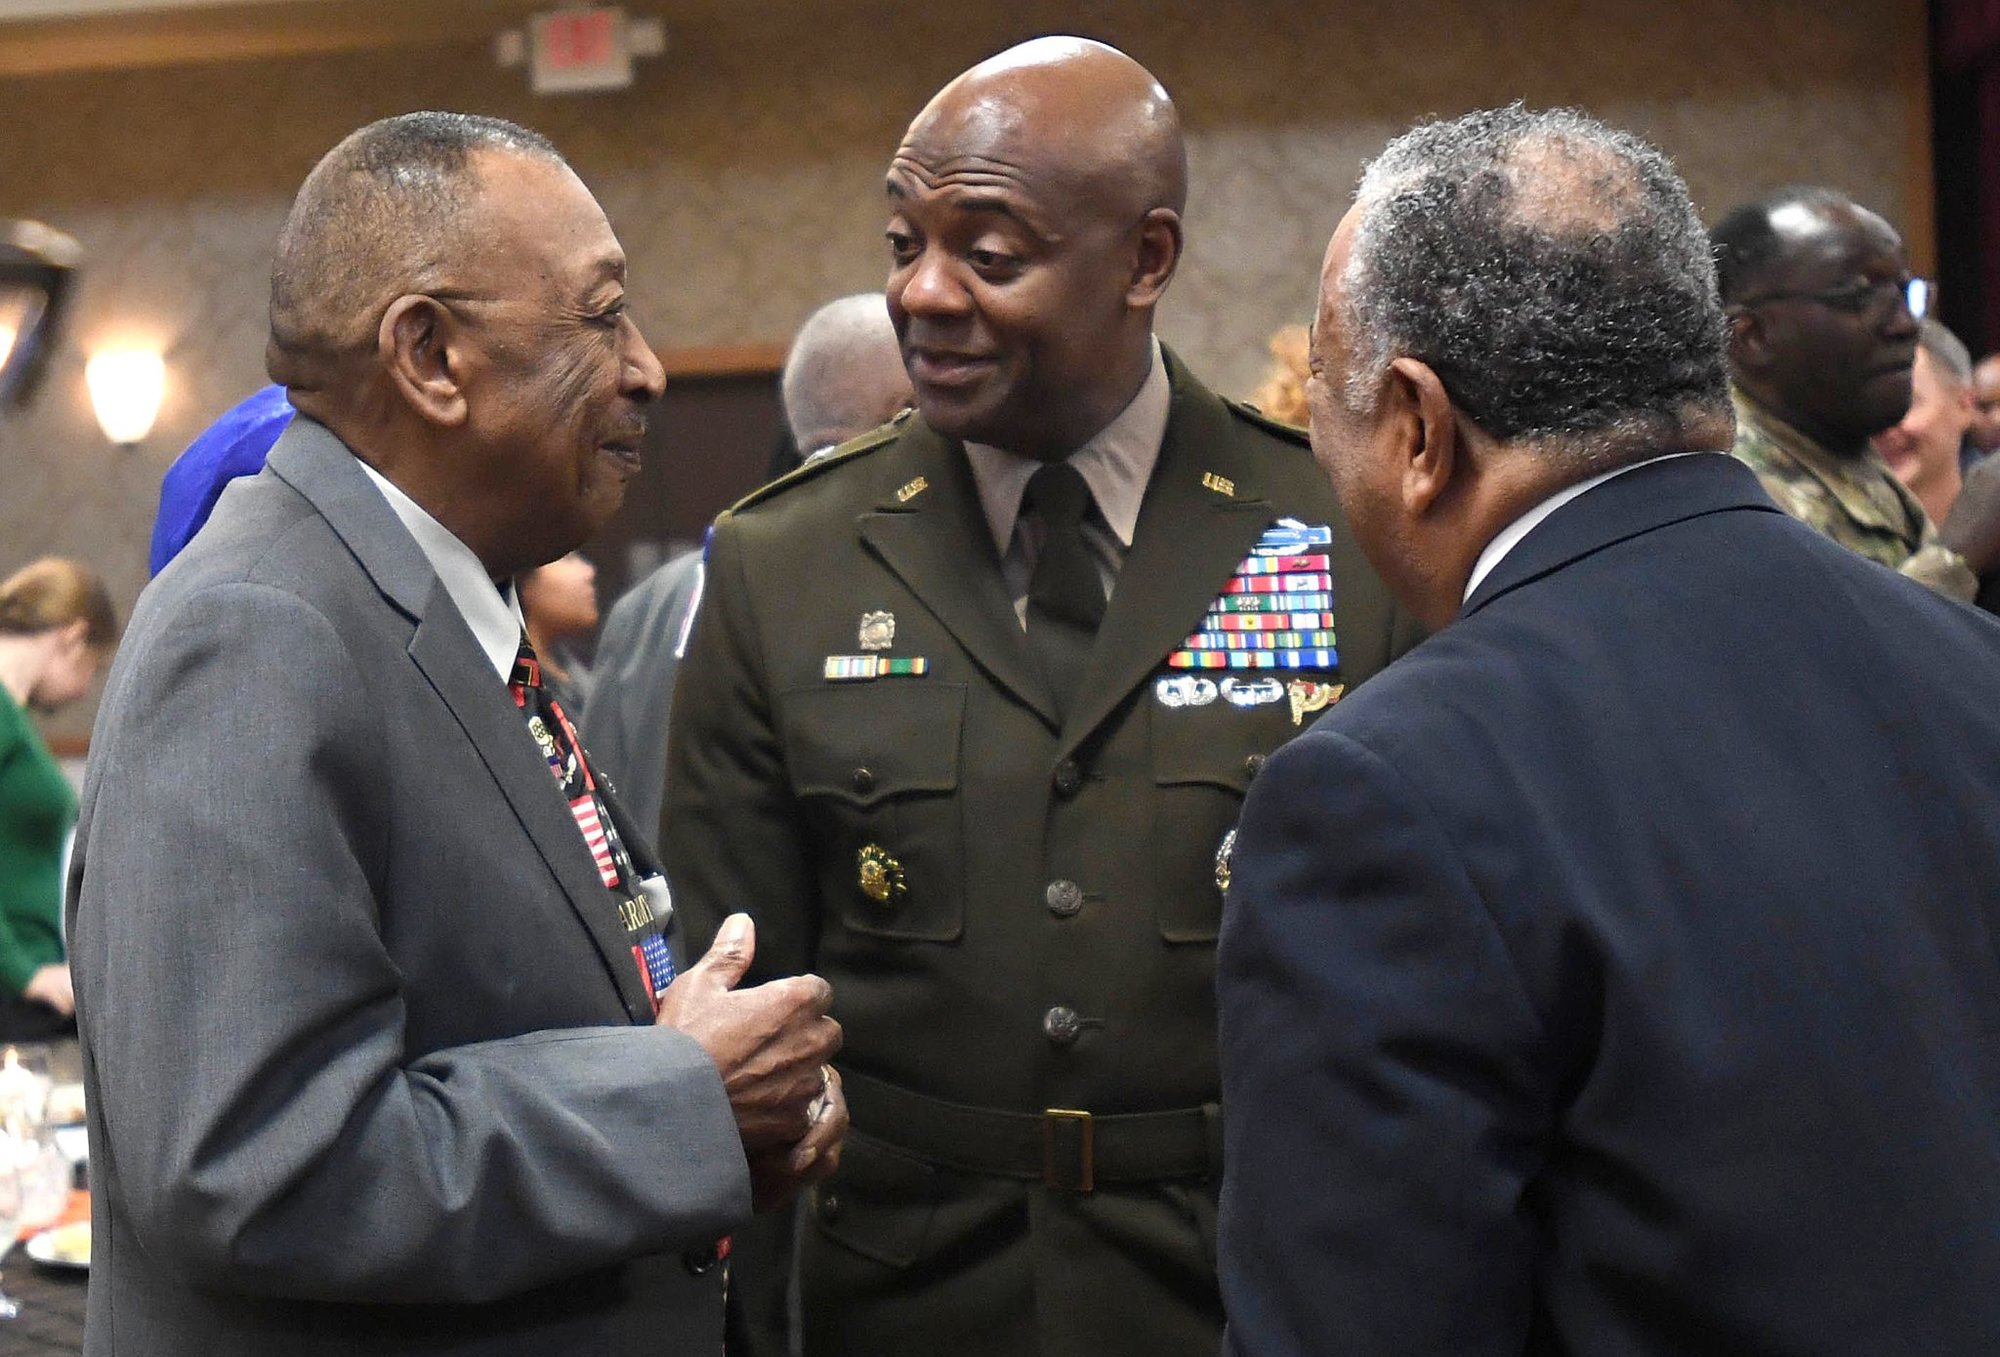 Army veteran Robert Young talks with US Army Training Center Commander Brig. Gen. Milford “Beags” Beagle Jr., after the African American and Black History Month observance Feb. 21, 2020, at the NCO Club at Fort Jackson, South Carolina. Fort Jackson Public Affairs Office photo by Sgt. Alexandra Shea.